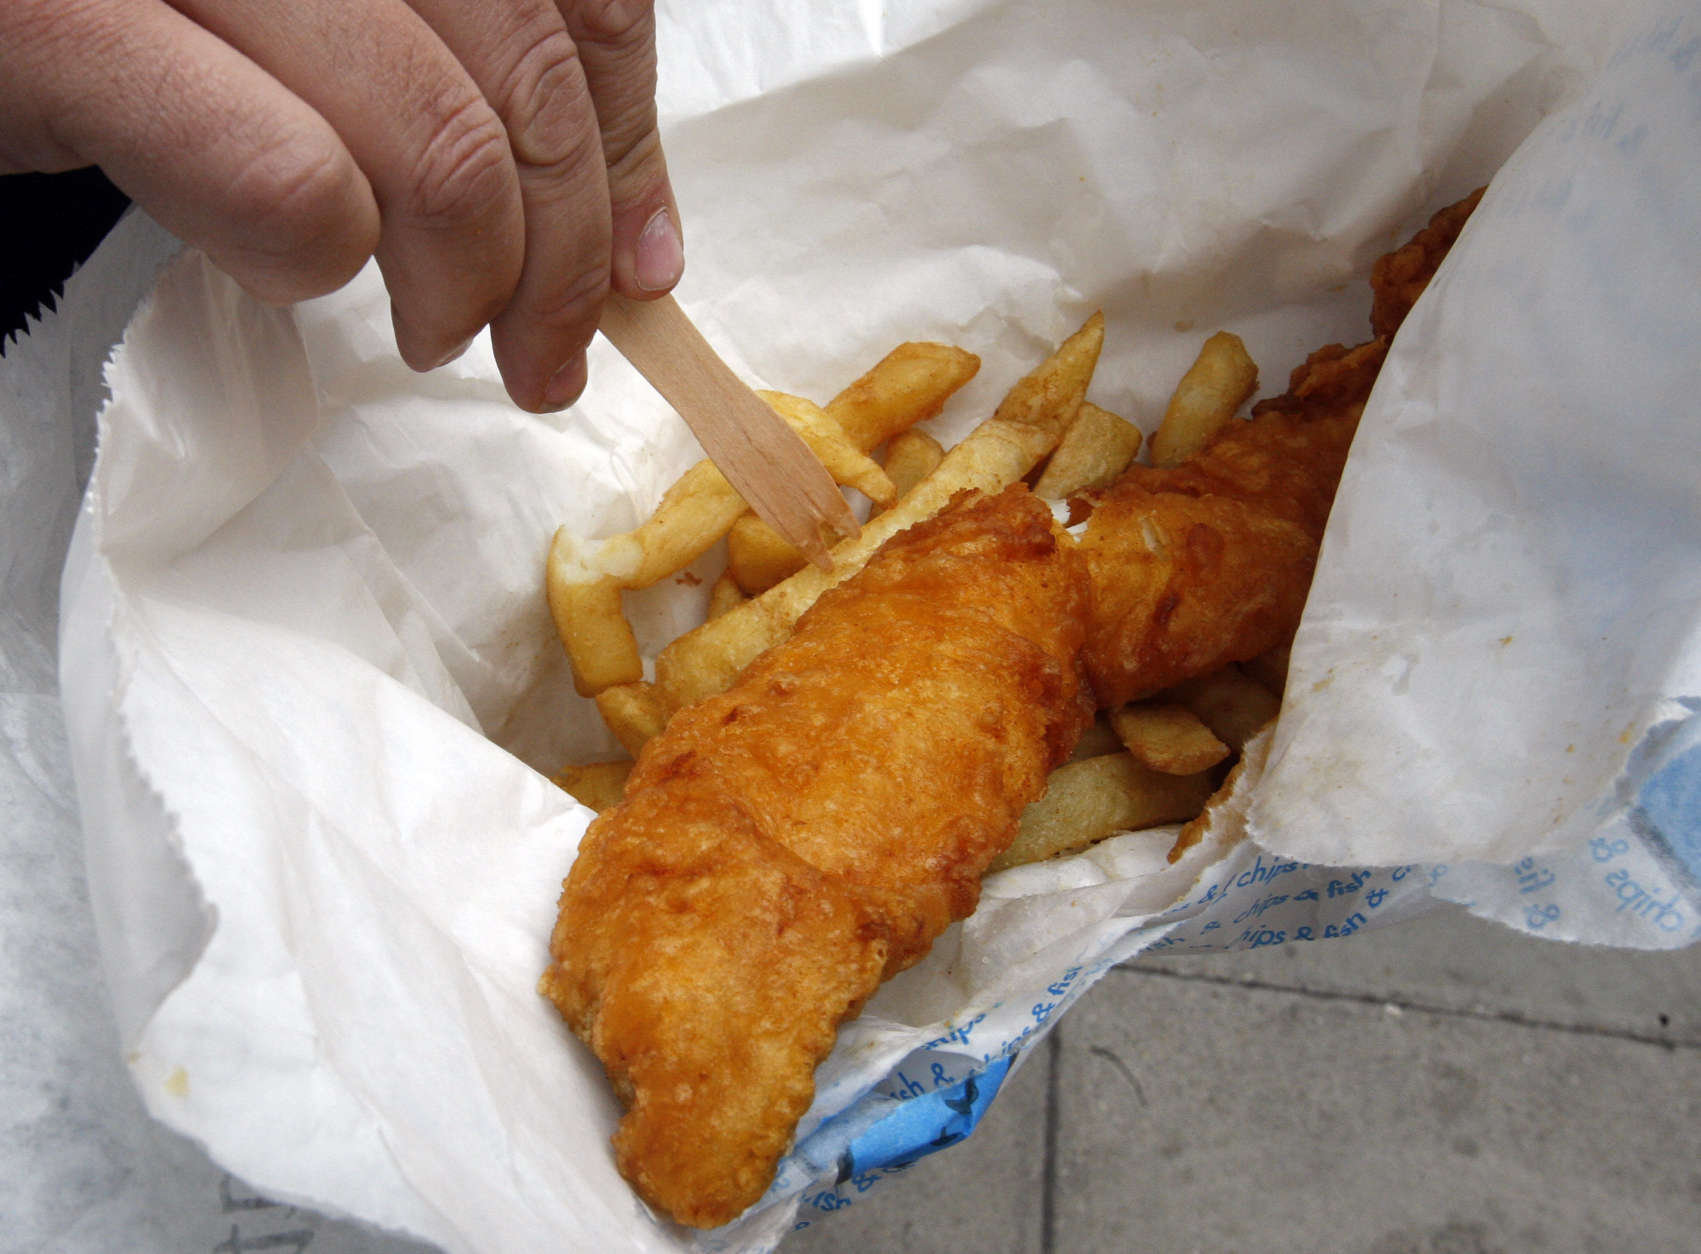 Cod and chips is served up in a traditional Fish and Chip shop in London, Friday, Oct. 16, 2009.  The EU Commission wants cod catch quotas to be cut by twenty-five percent to save threatened fish in key areas, saying the prized fish is sliding toward commercial extinction in several historic Atlantic fishing grounds.(AP Photo/Kirsty Wigglesworth)